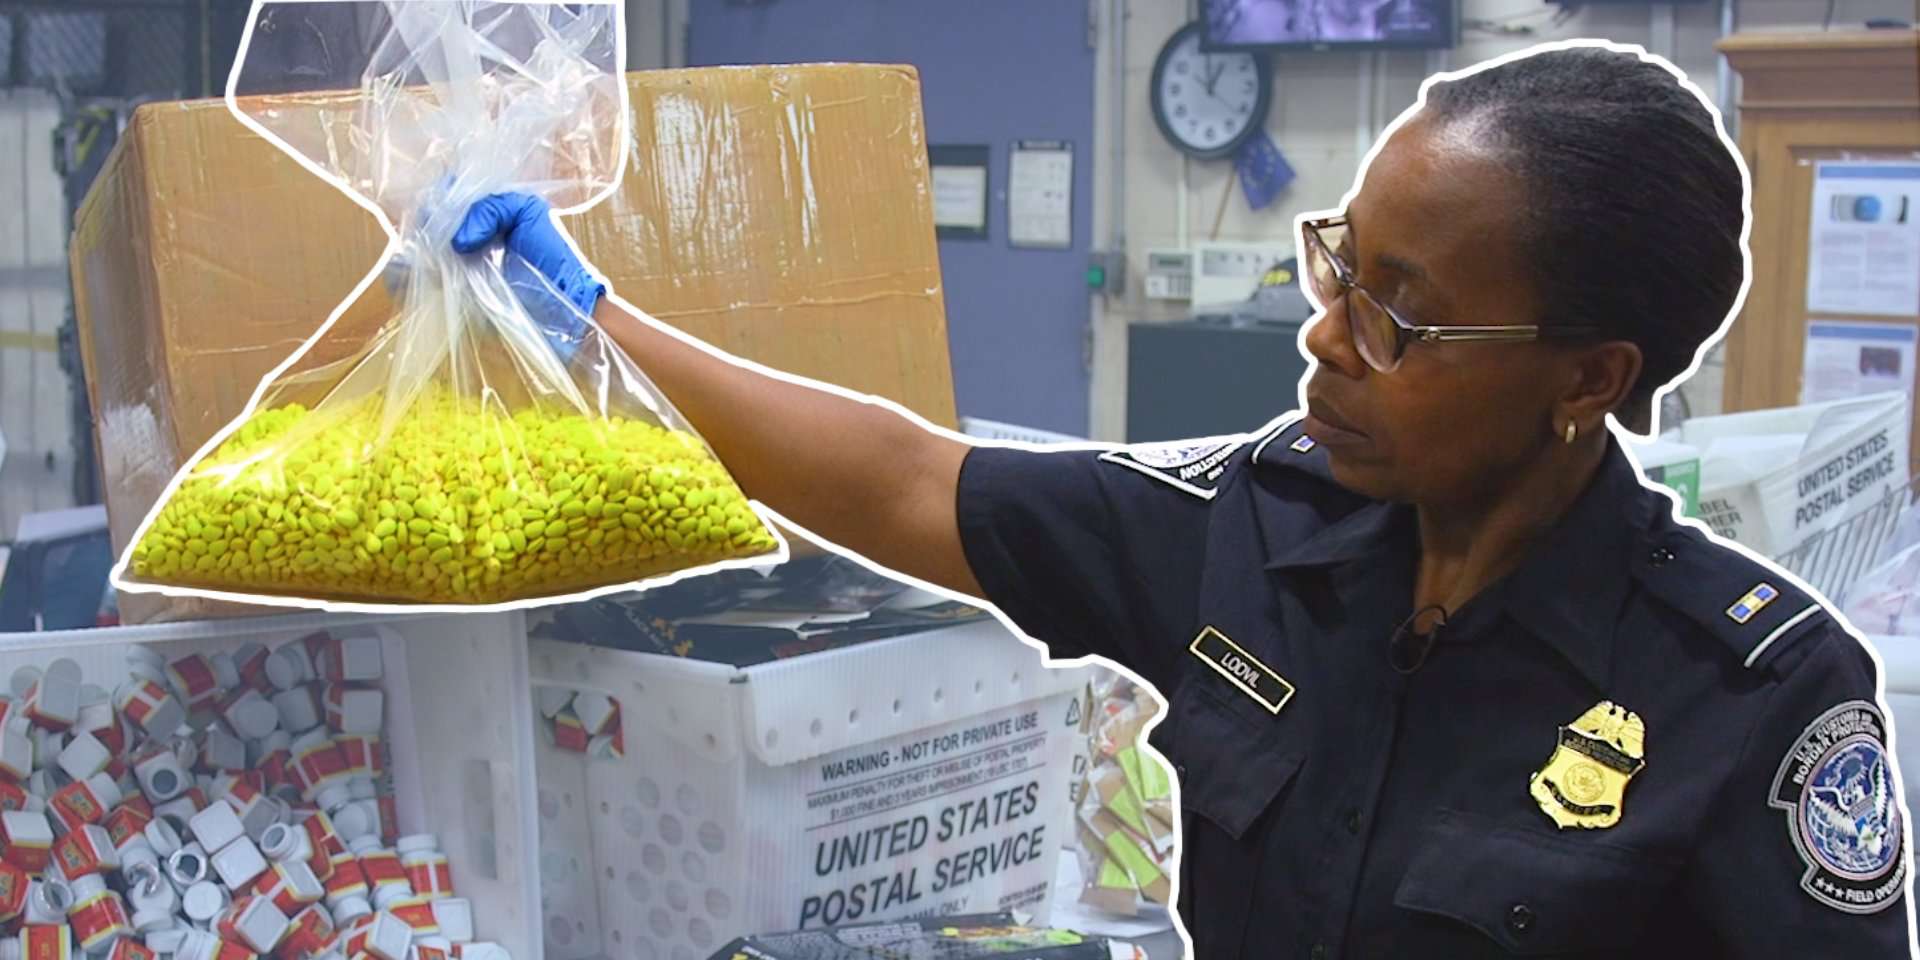 Taboola Ad Example 41128 - JFK Is America's Largest Mail Room. Here's How Customs Searches 1 Million Mail Packages A Day For Drugs And Counterfeit Goods.